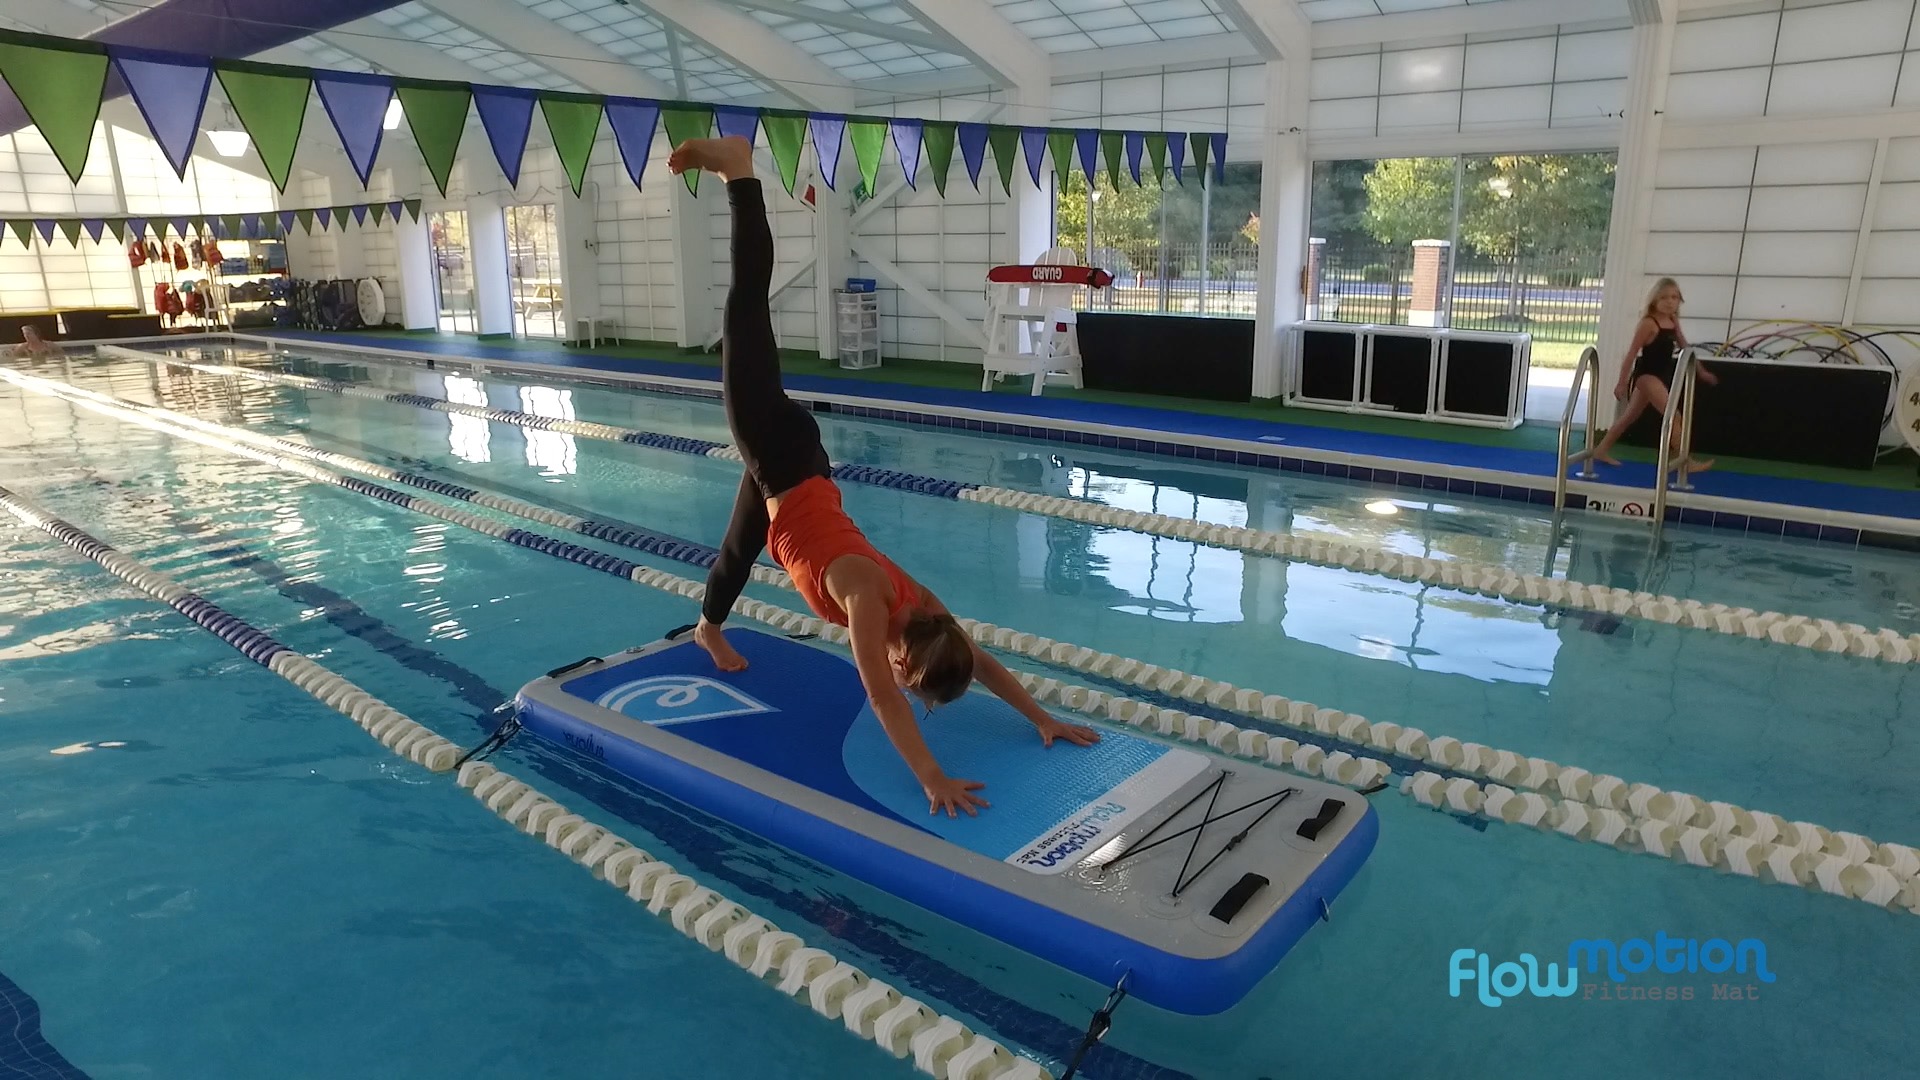 Demo/Used Inflatable Mat – Great for Yoga, Fitness, HITT, Camps or as a Pool Lounger Walk On Water SUP